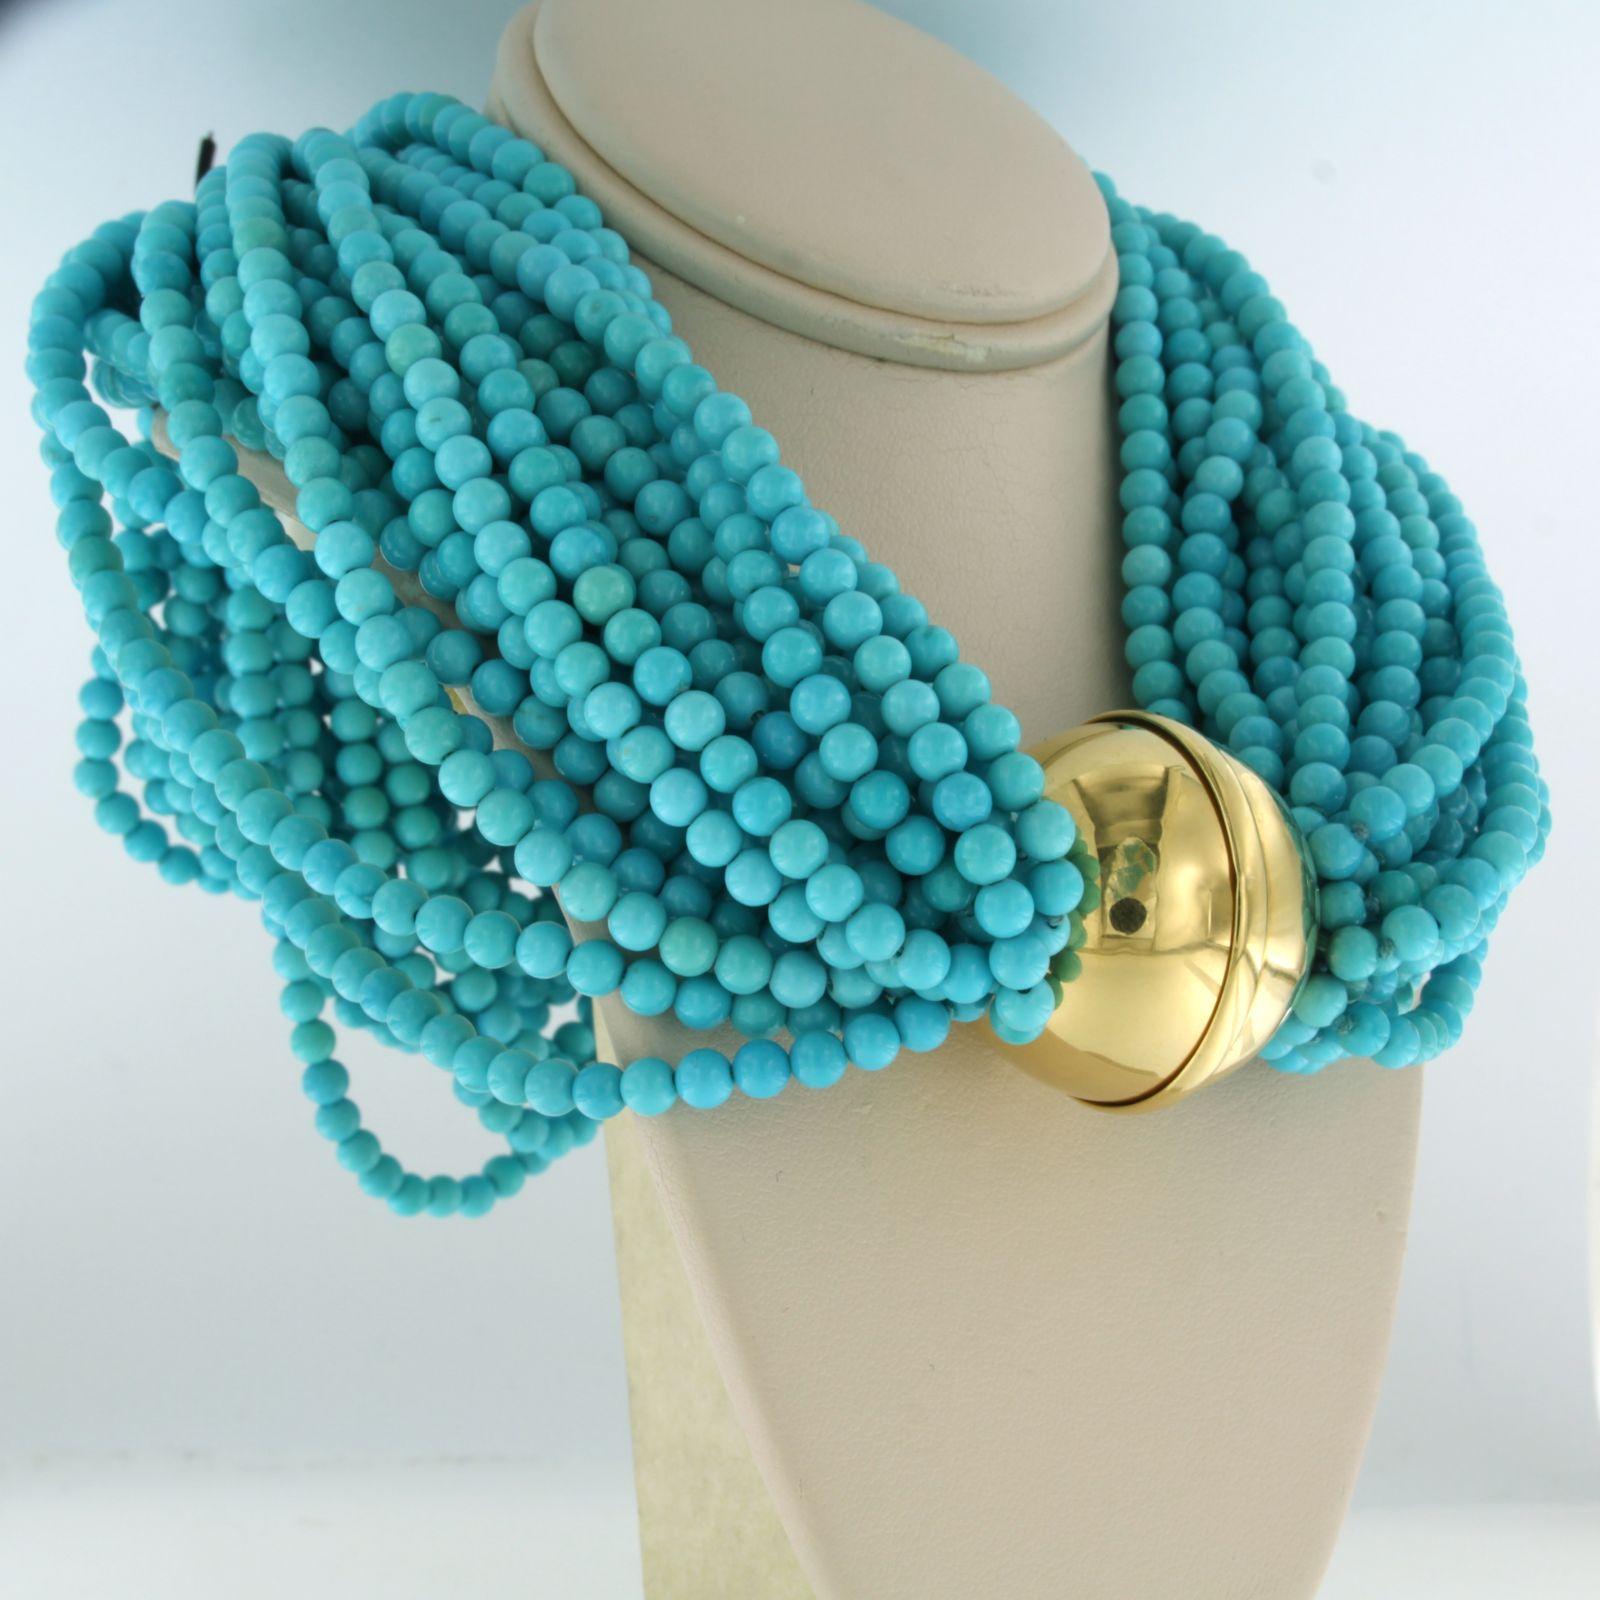 Modern Necklace with turquoise beads on a 18k yellow gold lock For Sale